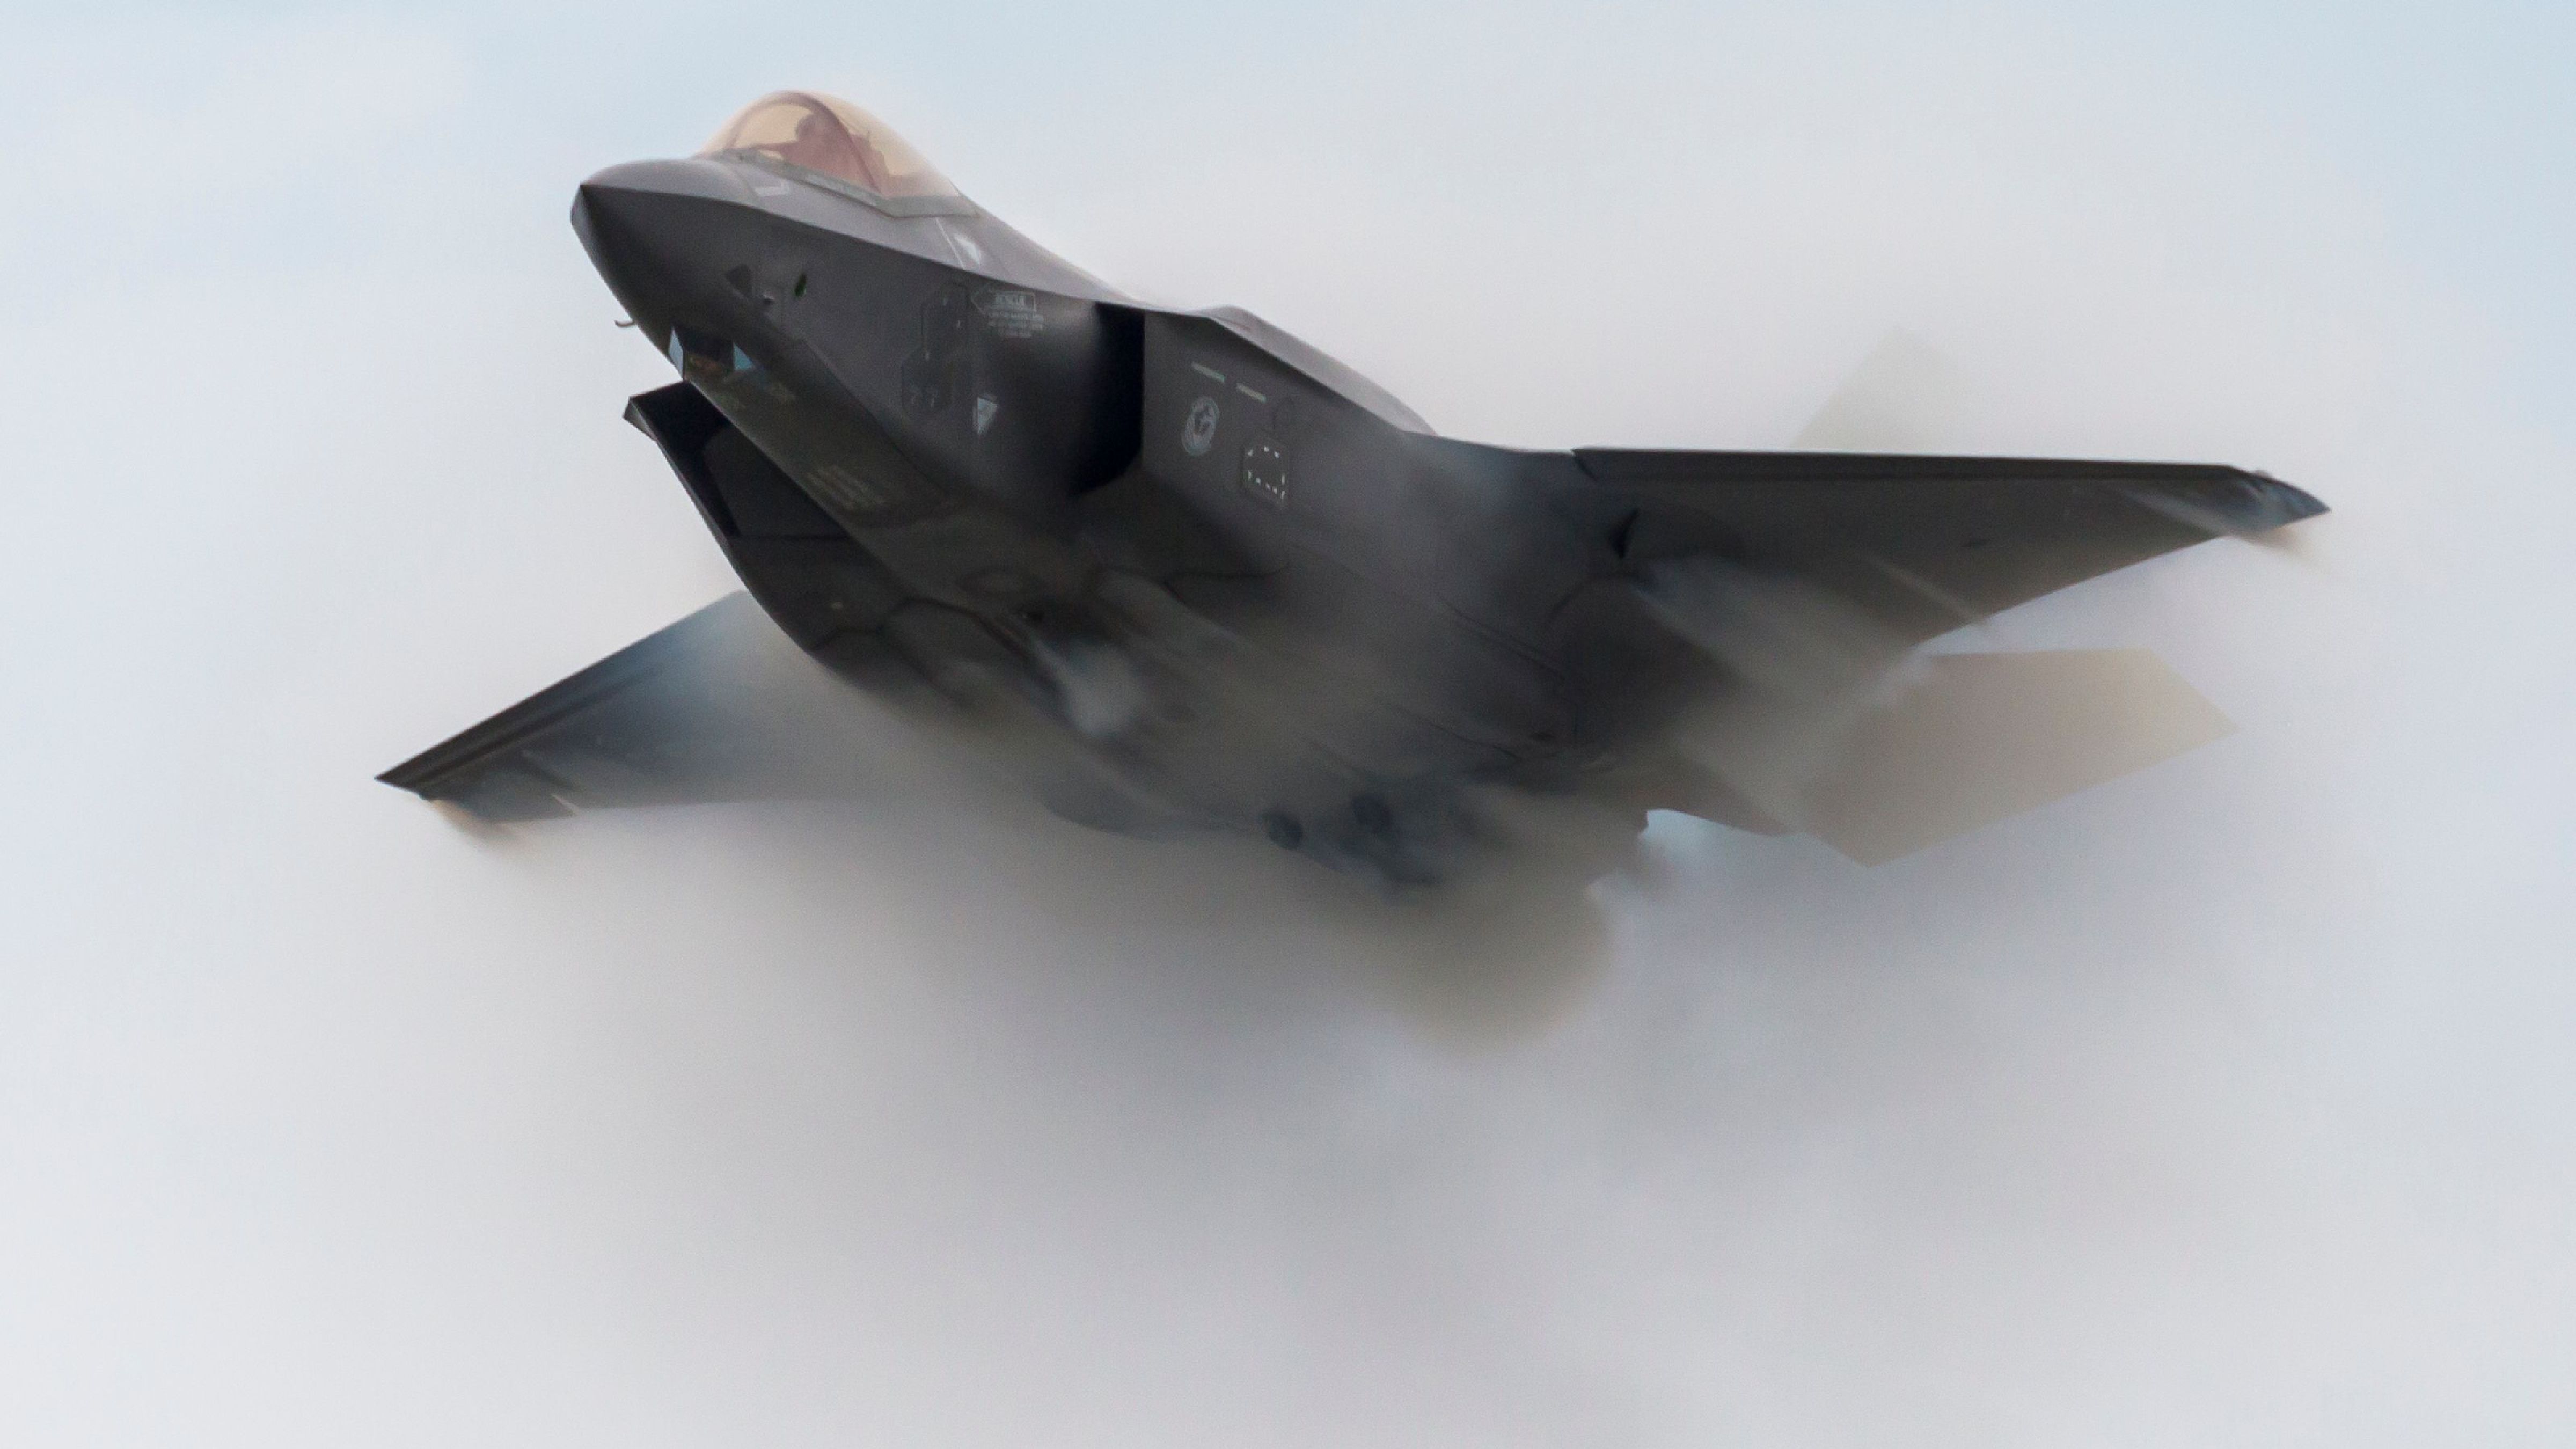 An F-35 flying through smoke during an aerial performance.